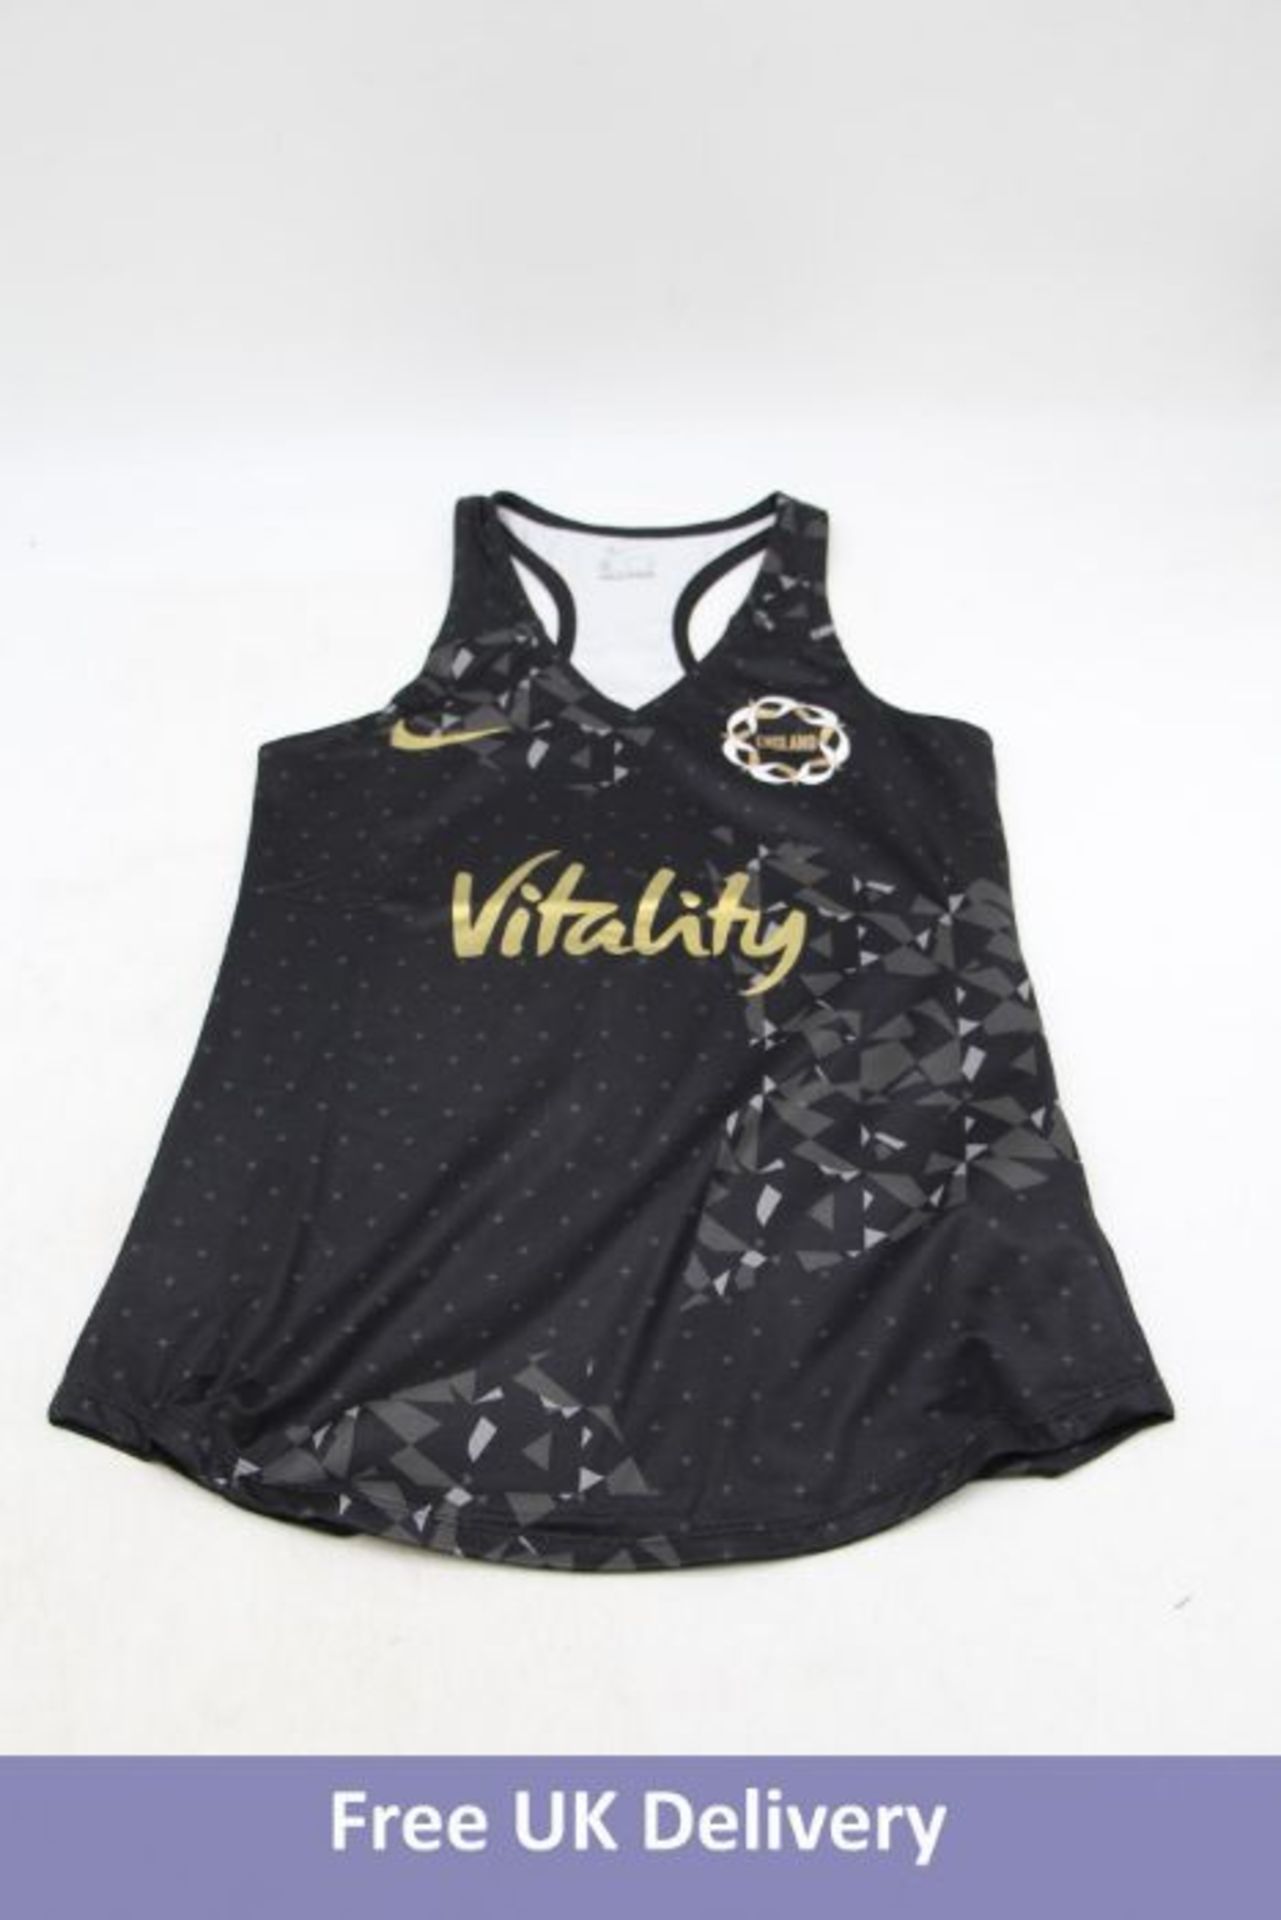 Two England Netball Nike Training Tank, Black Anthracite, Small - Image 2 of 2